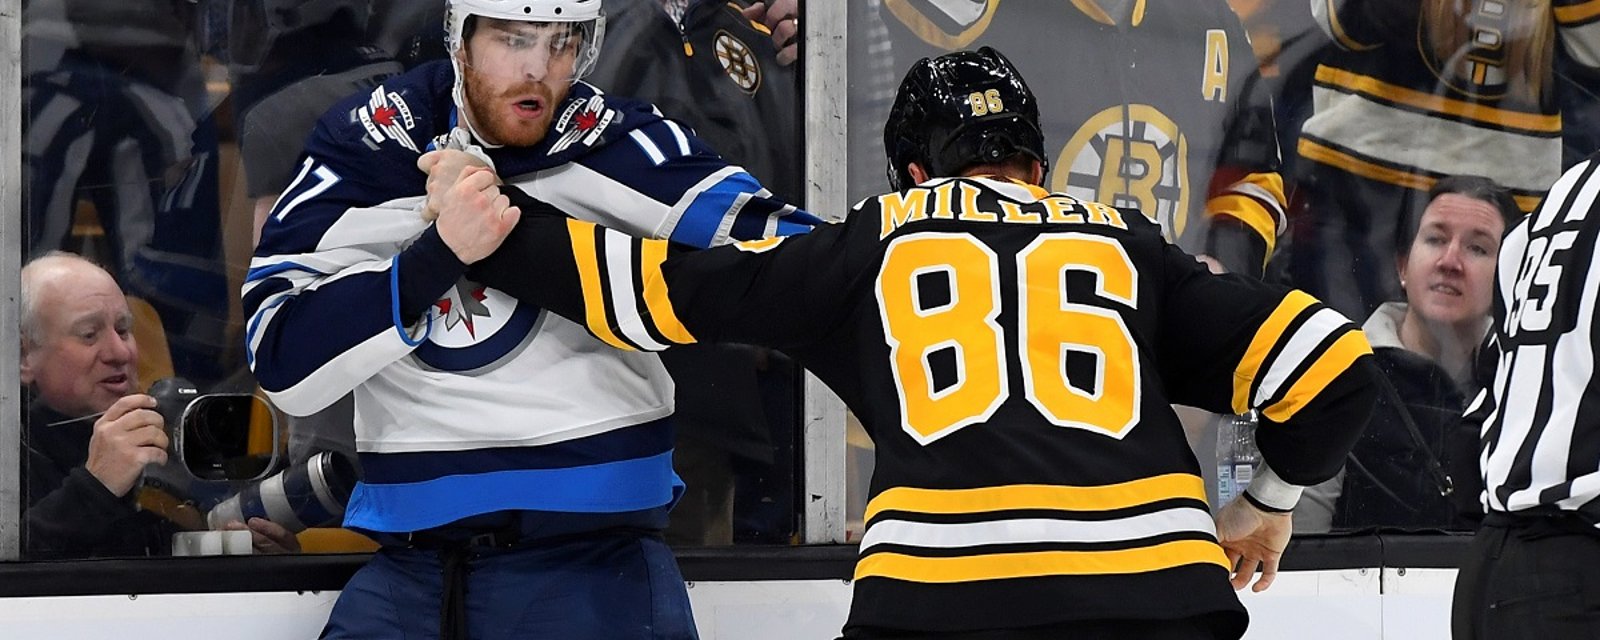 Rumor: Kevan Miller has suffered a setback in his recovery.